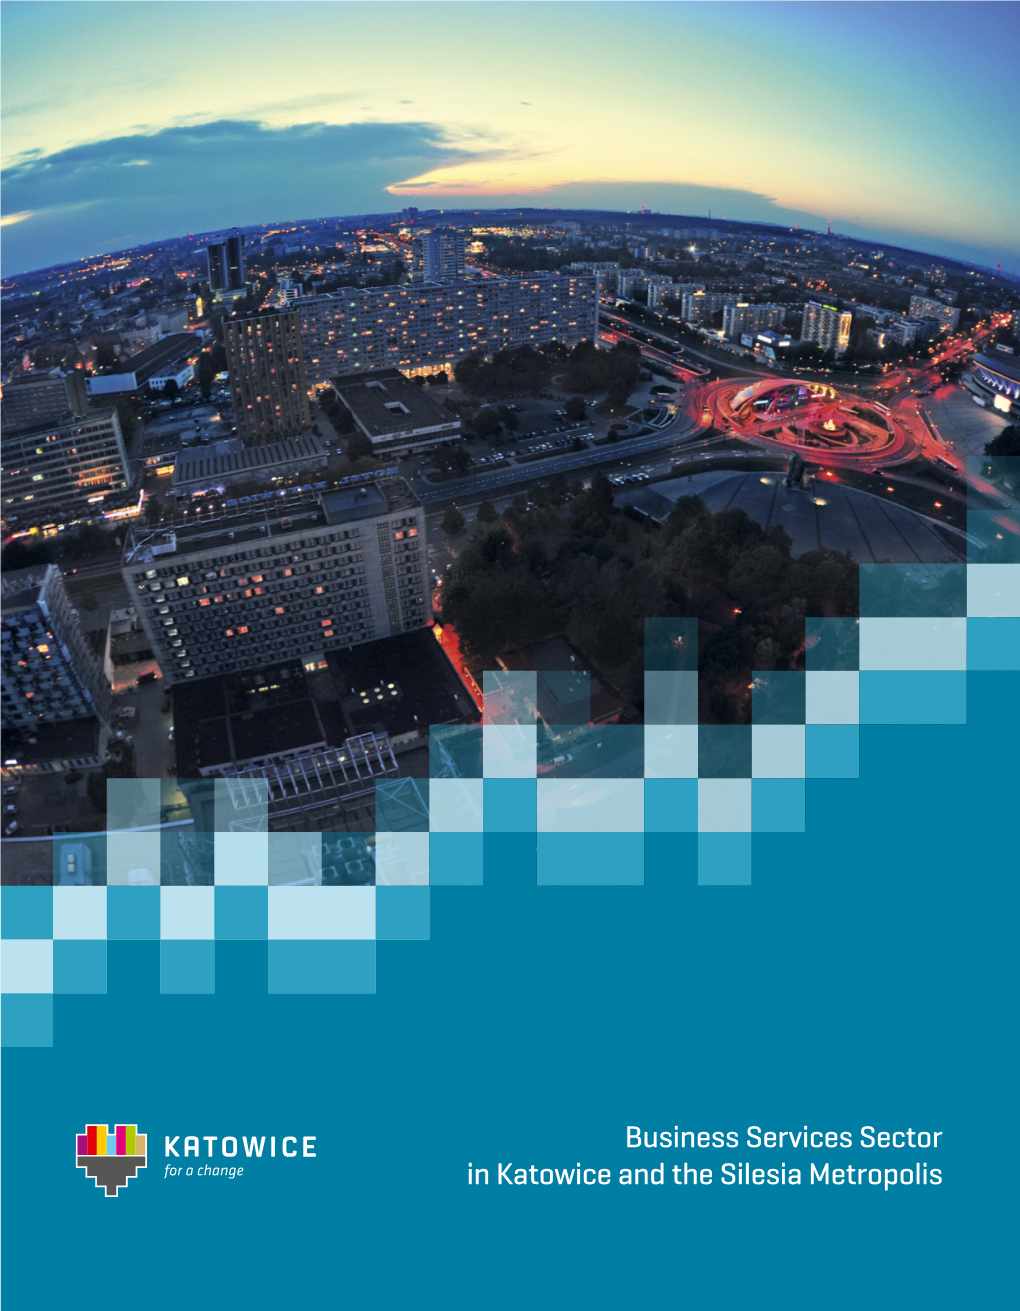 Business Services Sector in Katowice and the Silesia Metropolis